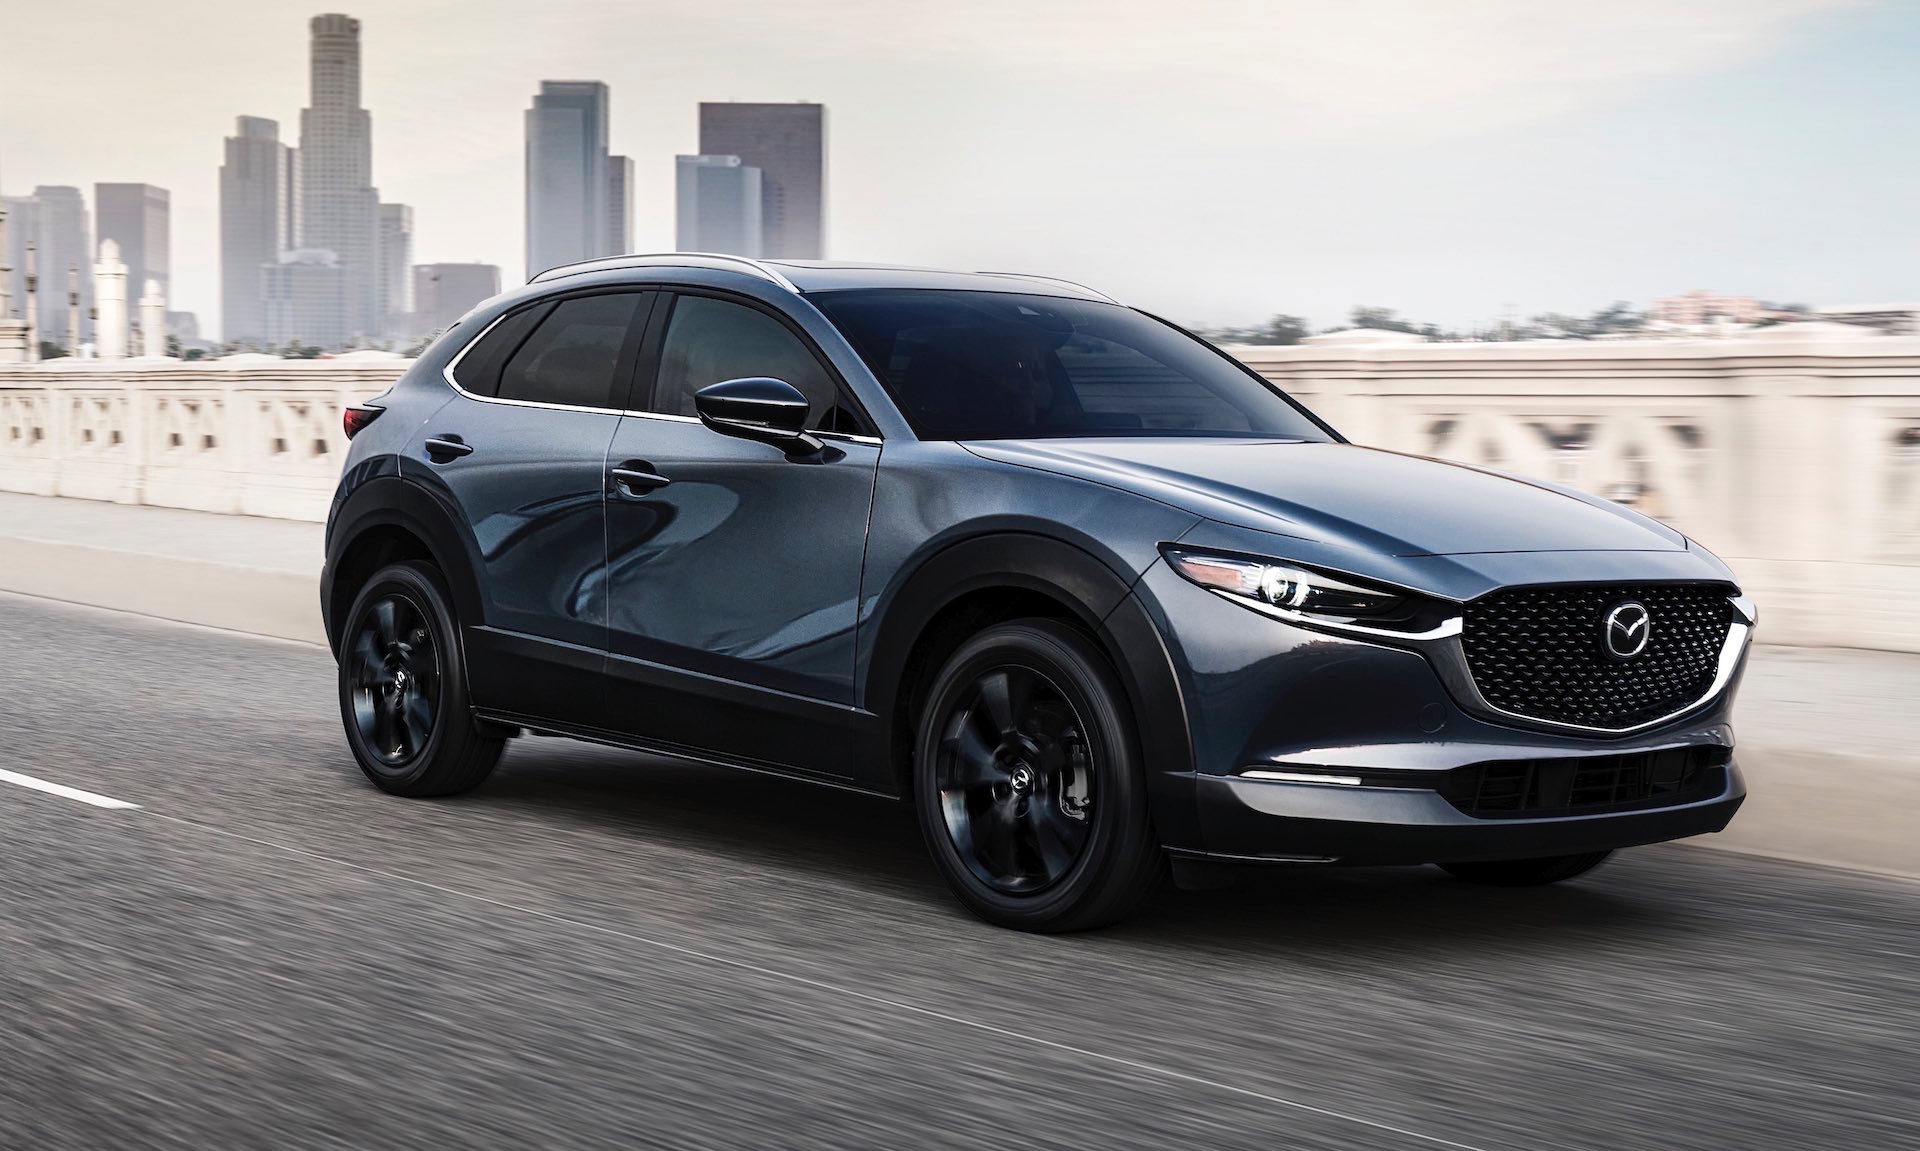 2021 Mazda CX-30 Turbo announced with 2.5T AWD